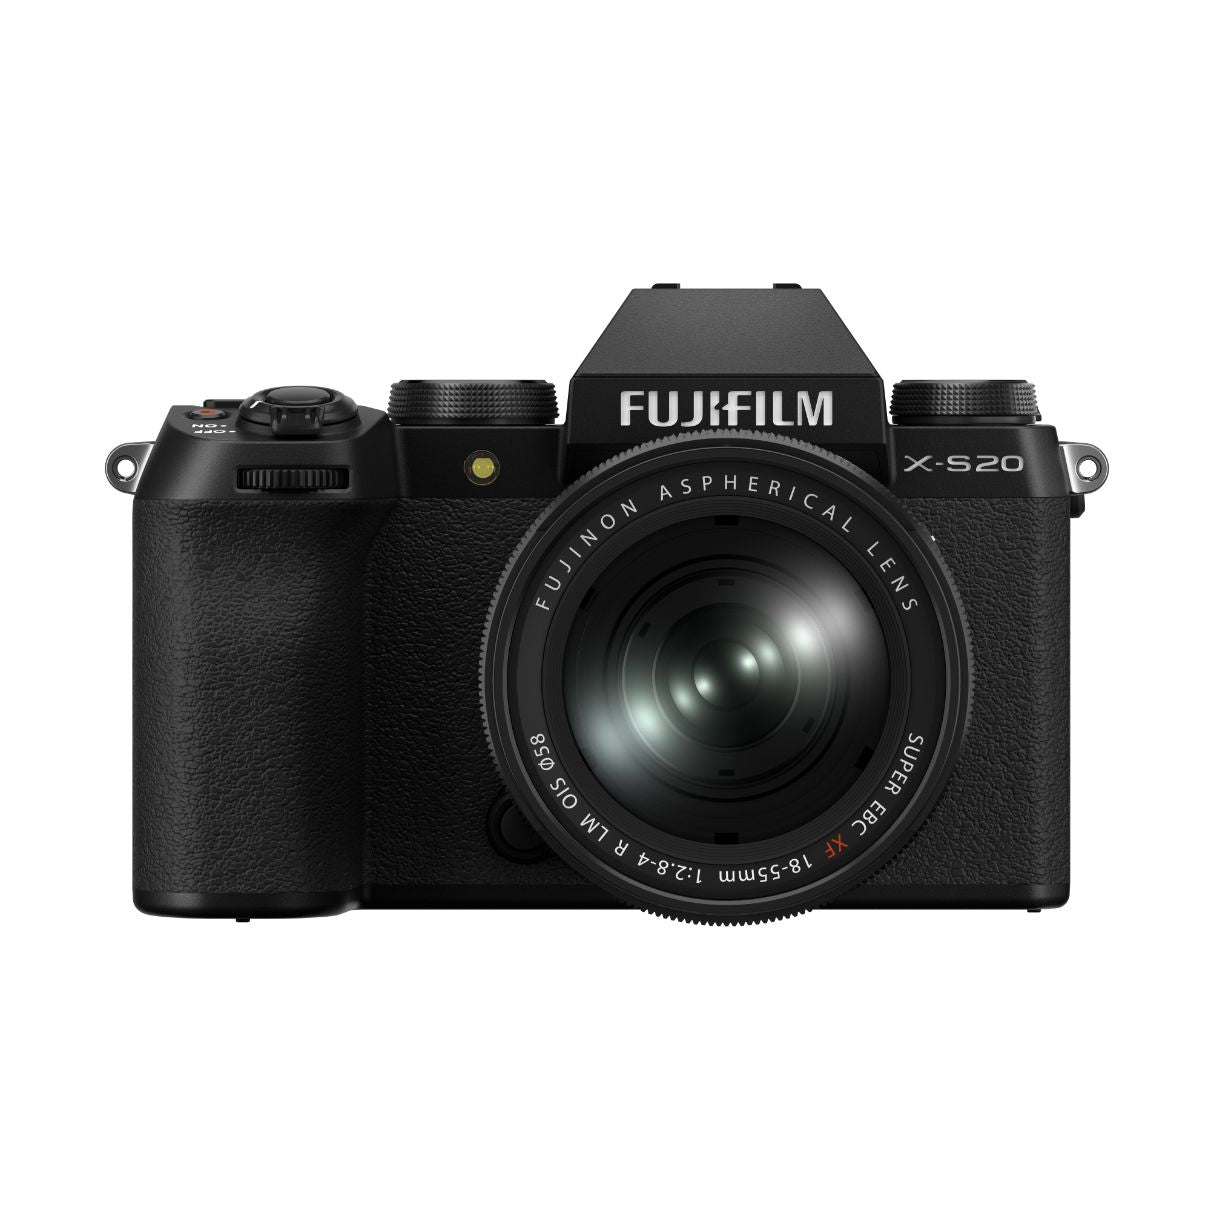 Product Image of Fujifilm X-S20 mirrorless camera with XF 18-55mm F2.8-4 R lens - Black